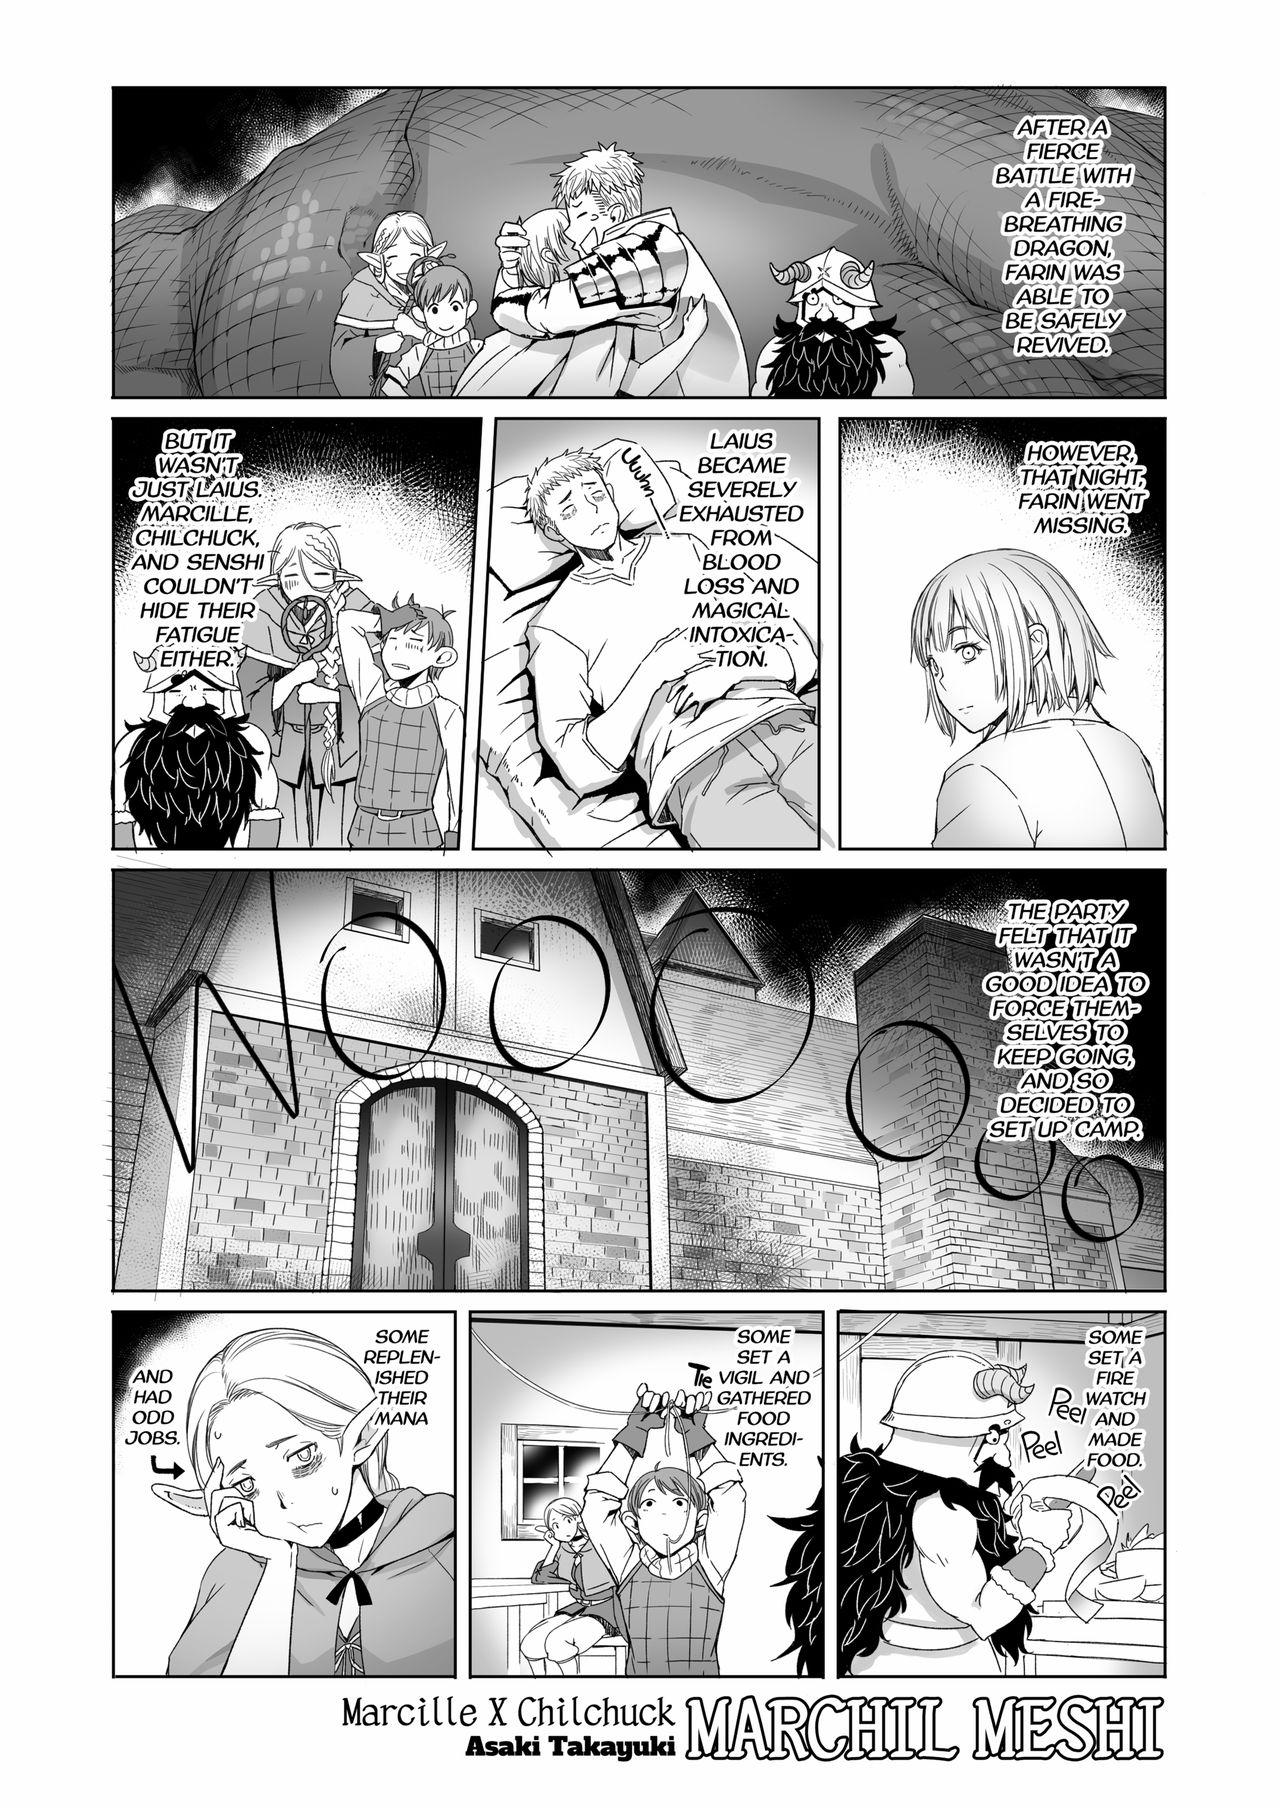 Gay Medic Marchil Meshi - Dungeon meshi Analsex - Page 2